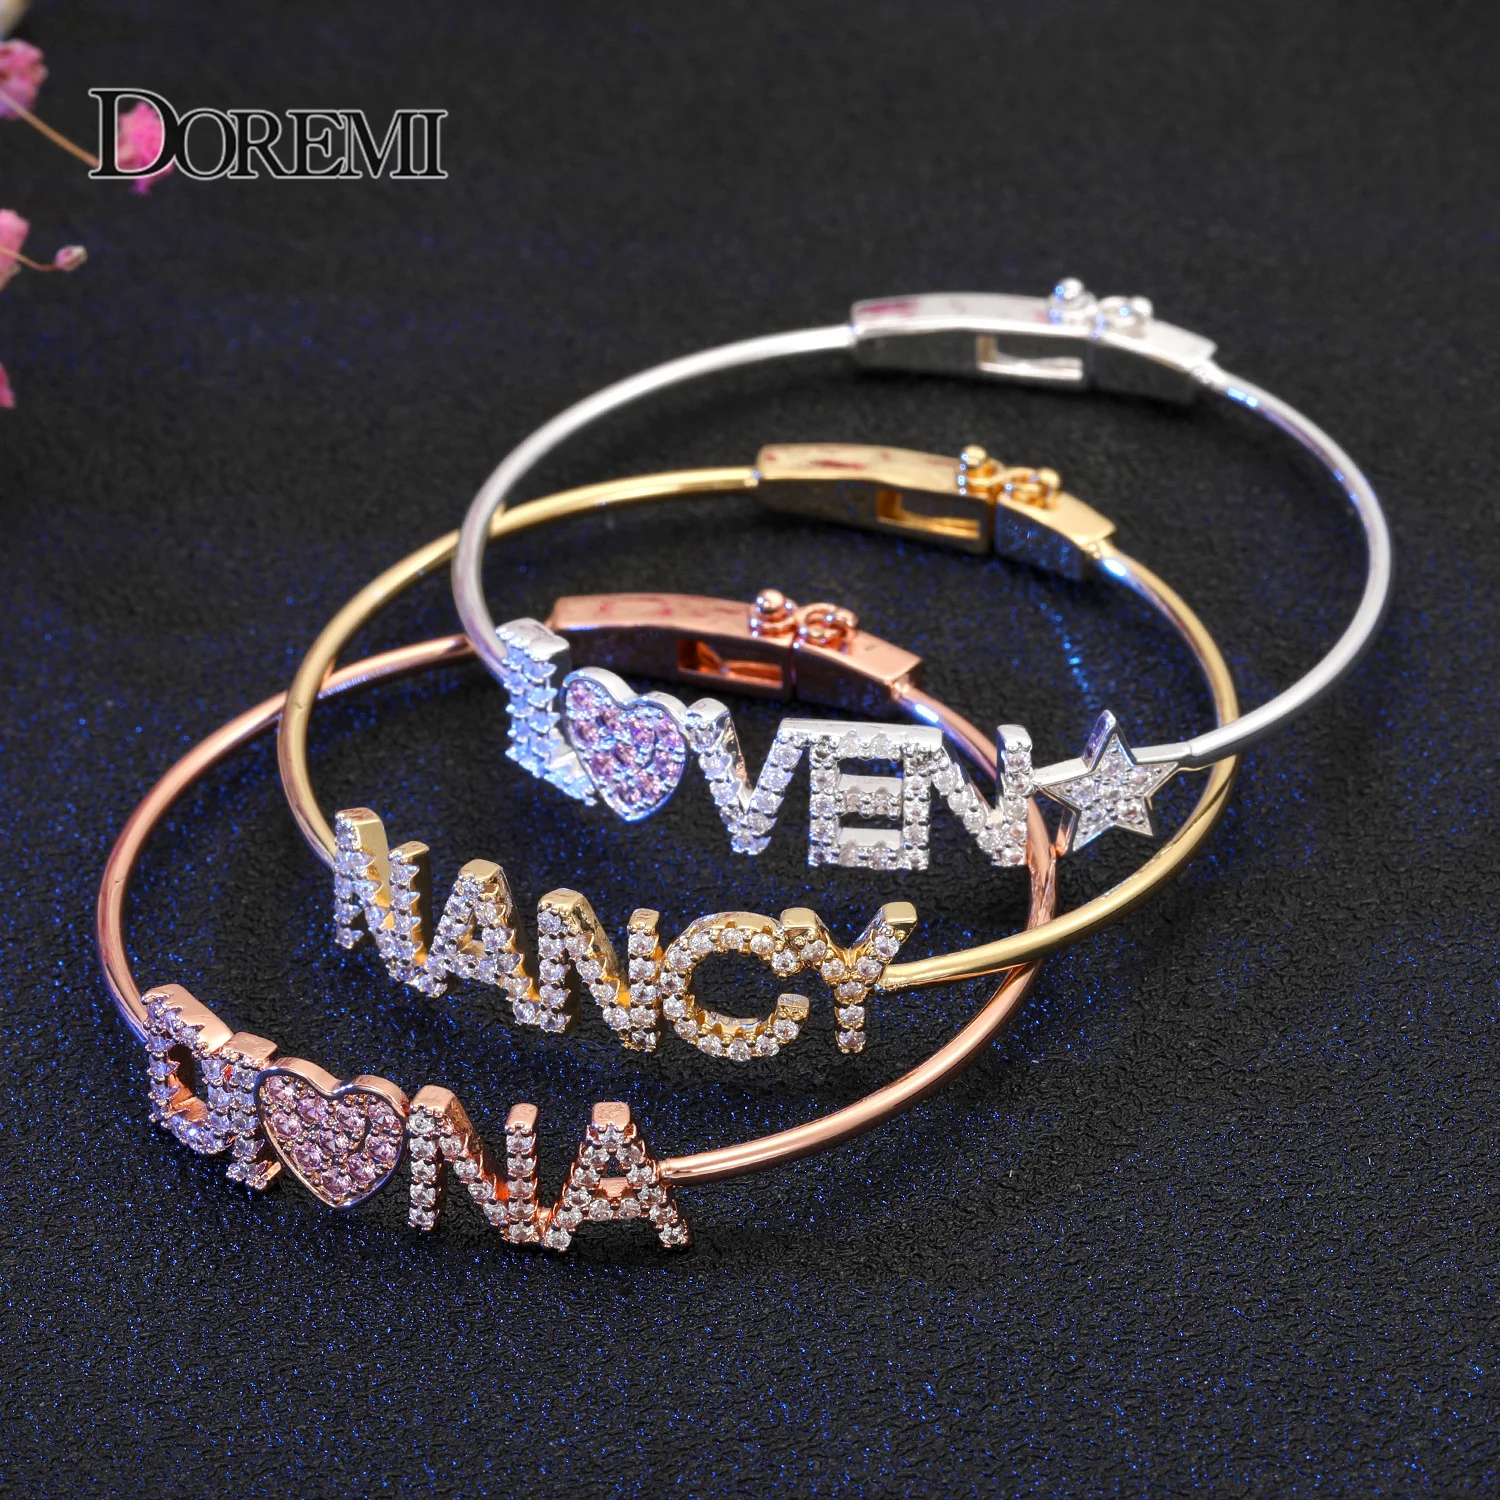 DOREMI Crystal Name Bangle with Zircon Pink Heart Bracelet Custom 9mm Letter Personalized Bracelets Rhinestone Hand Jewelry doremi crystal name bangle with zircon pink heart bracelet custom 9mm letter personalized bracelets rhinestone hand jewelry